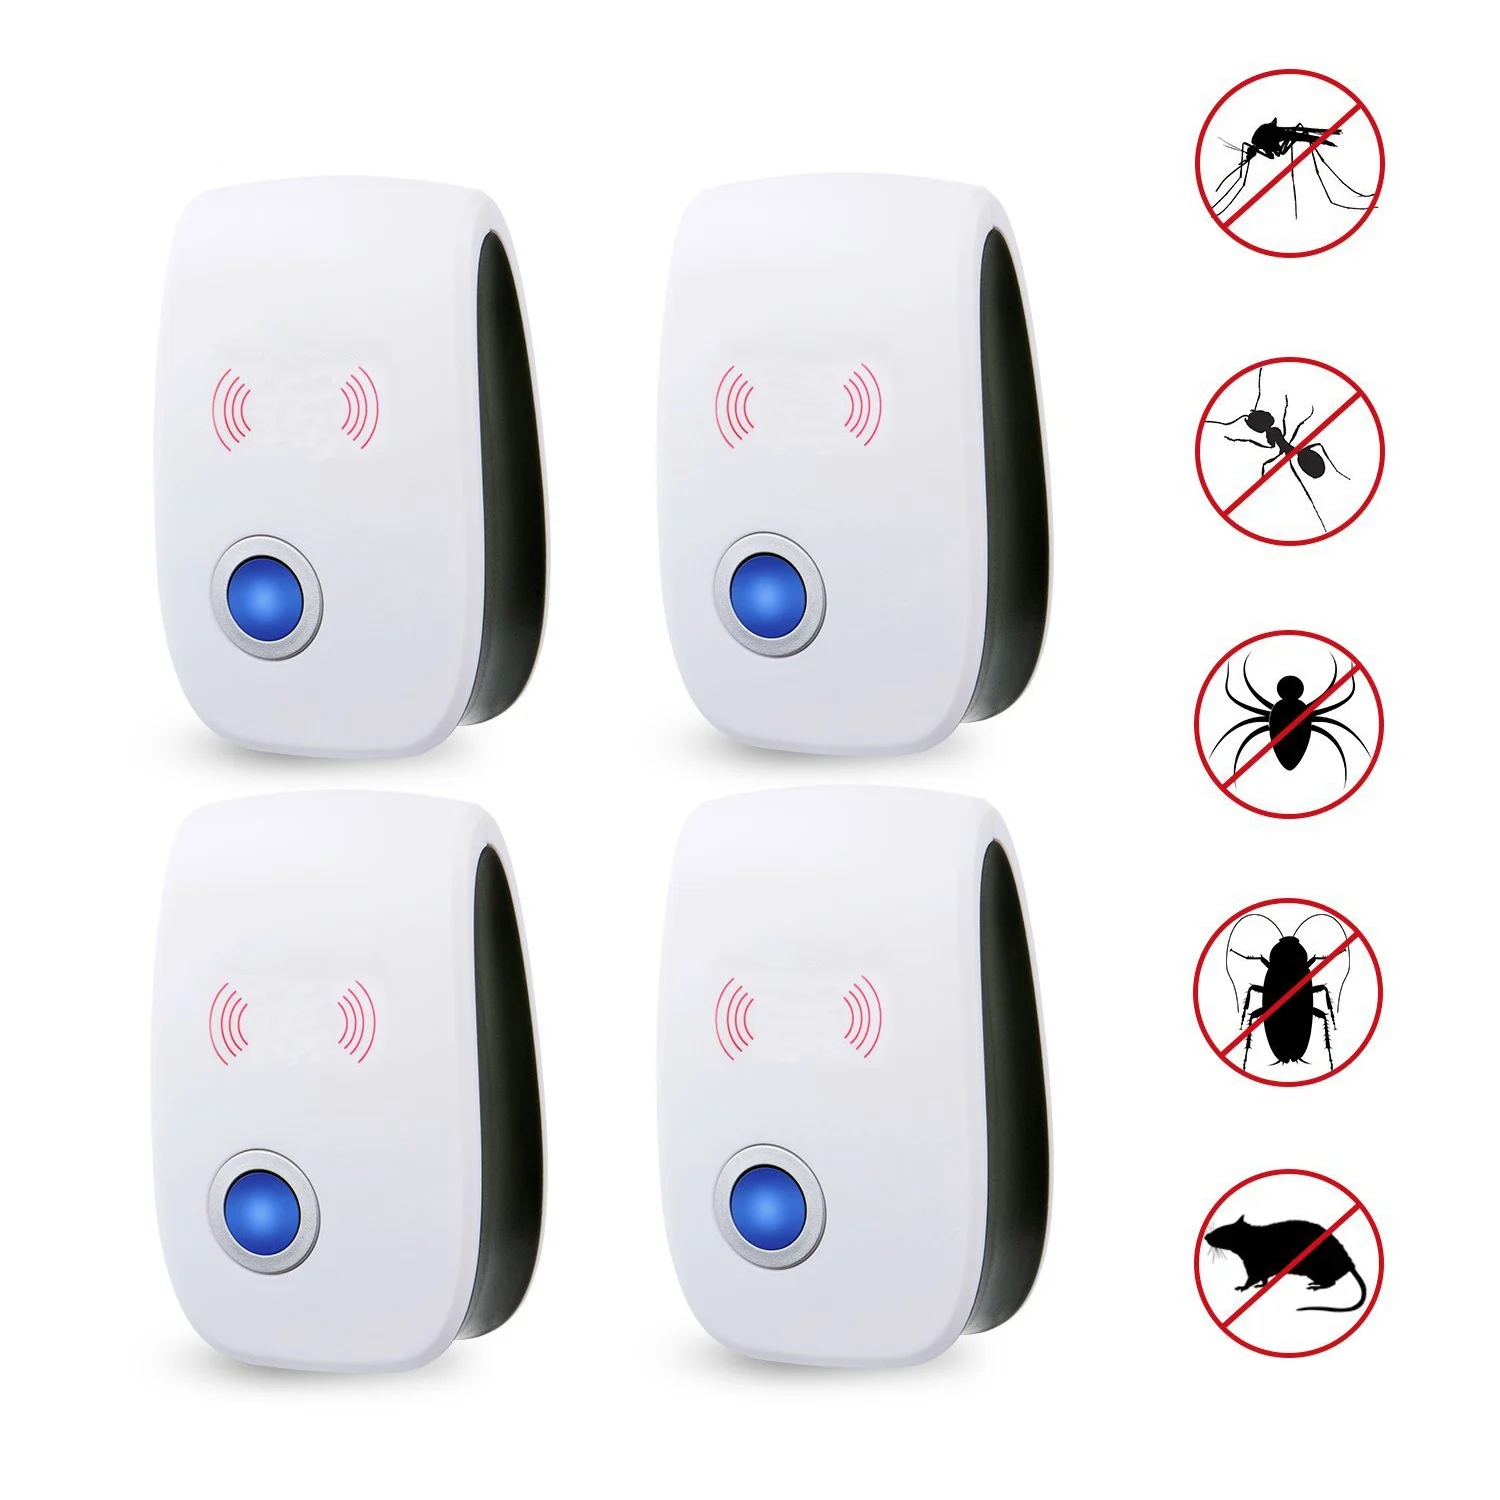 

4 Pack Ultrasonic Pest Repeller for Insects, Mosquitoes, Mice, Spiders, Ant, Rats, Roaches, Bugs/Non-toxic, Extremely Safe for